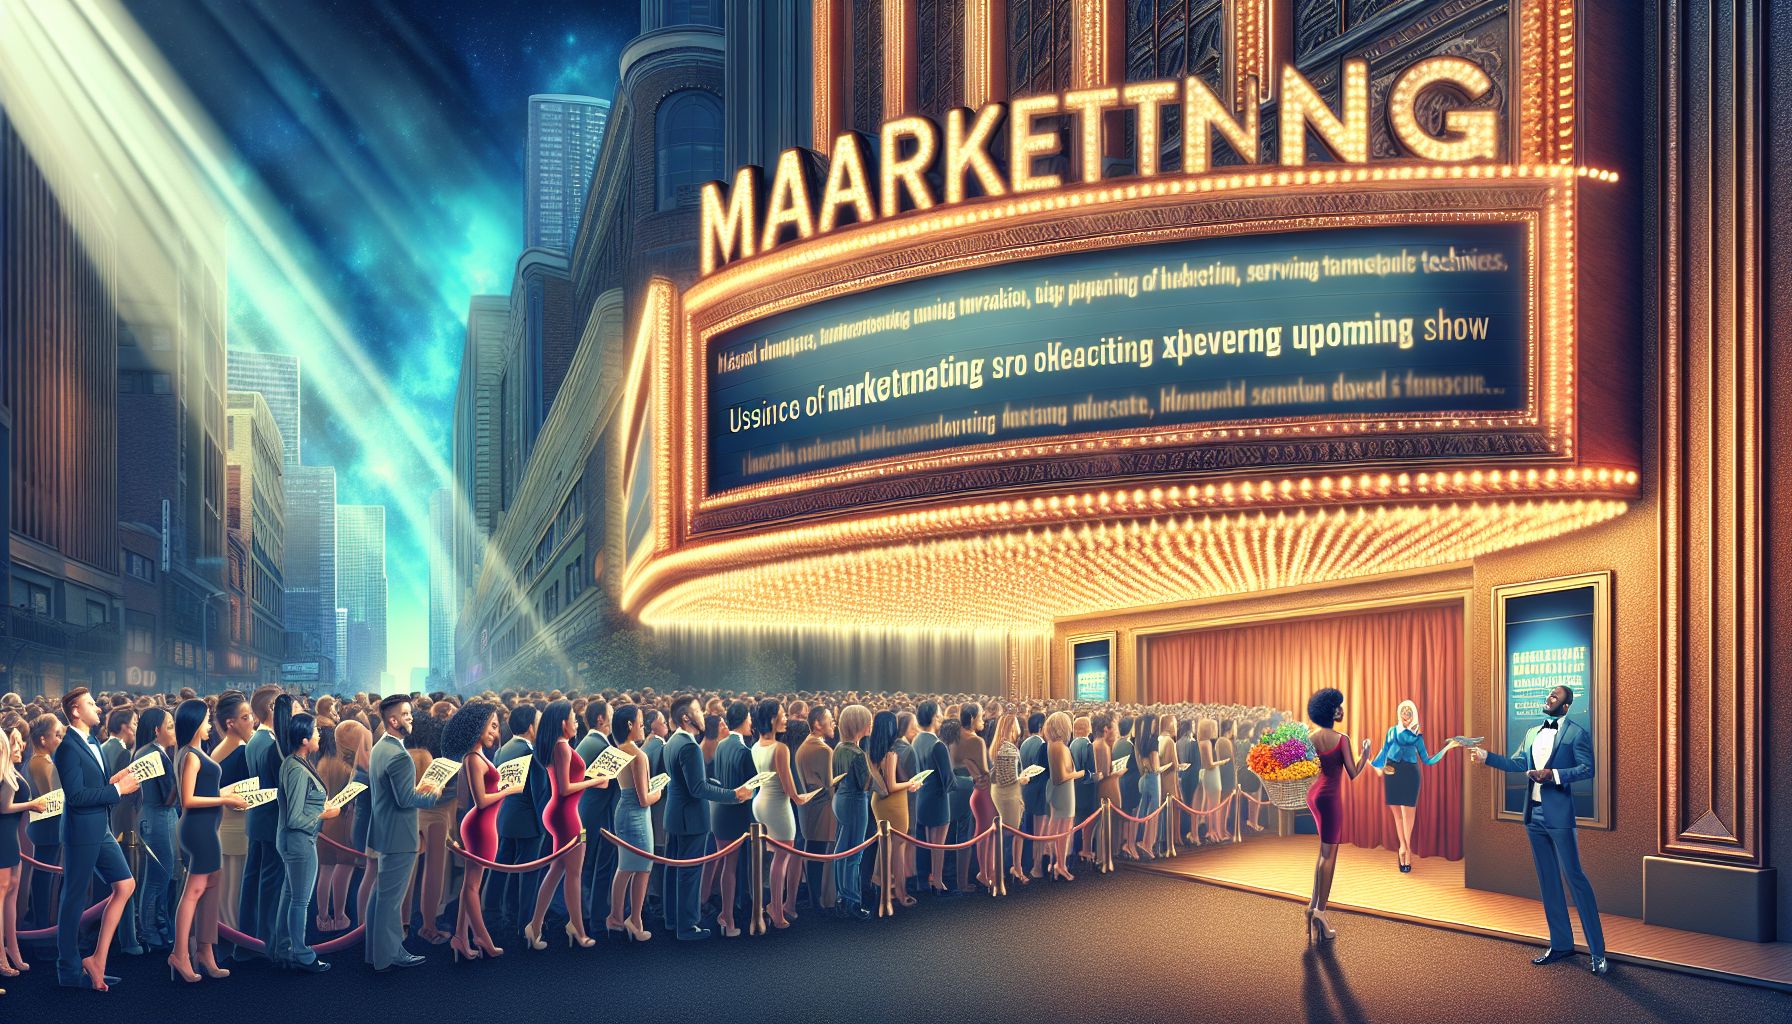 The Power of Marketing: Boosting Theatre Attendance for Owners and Visitors